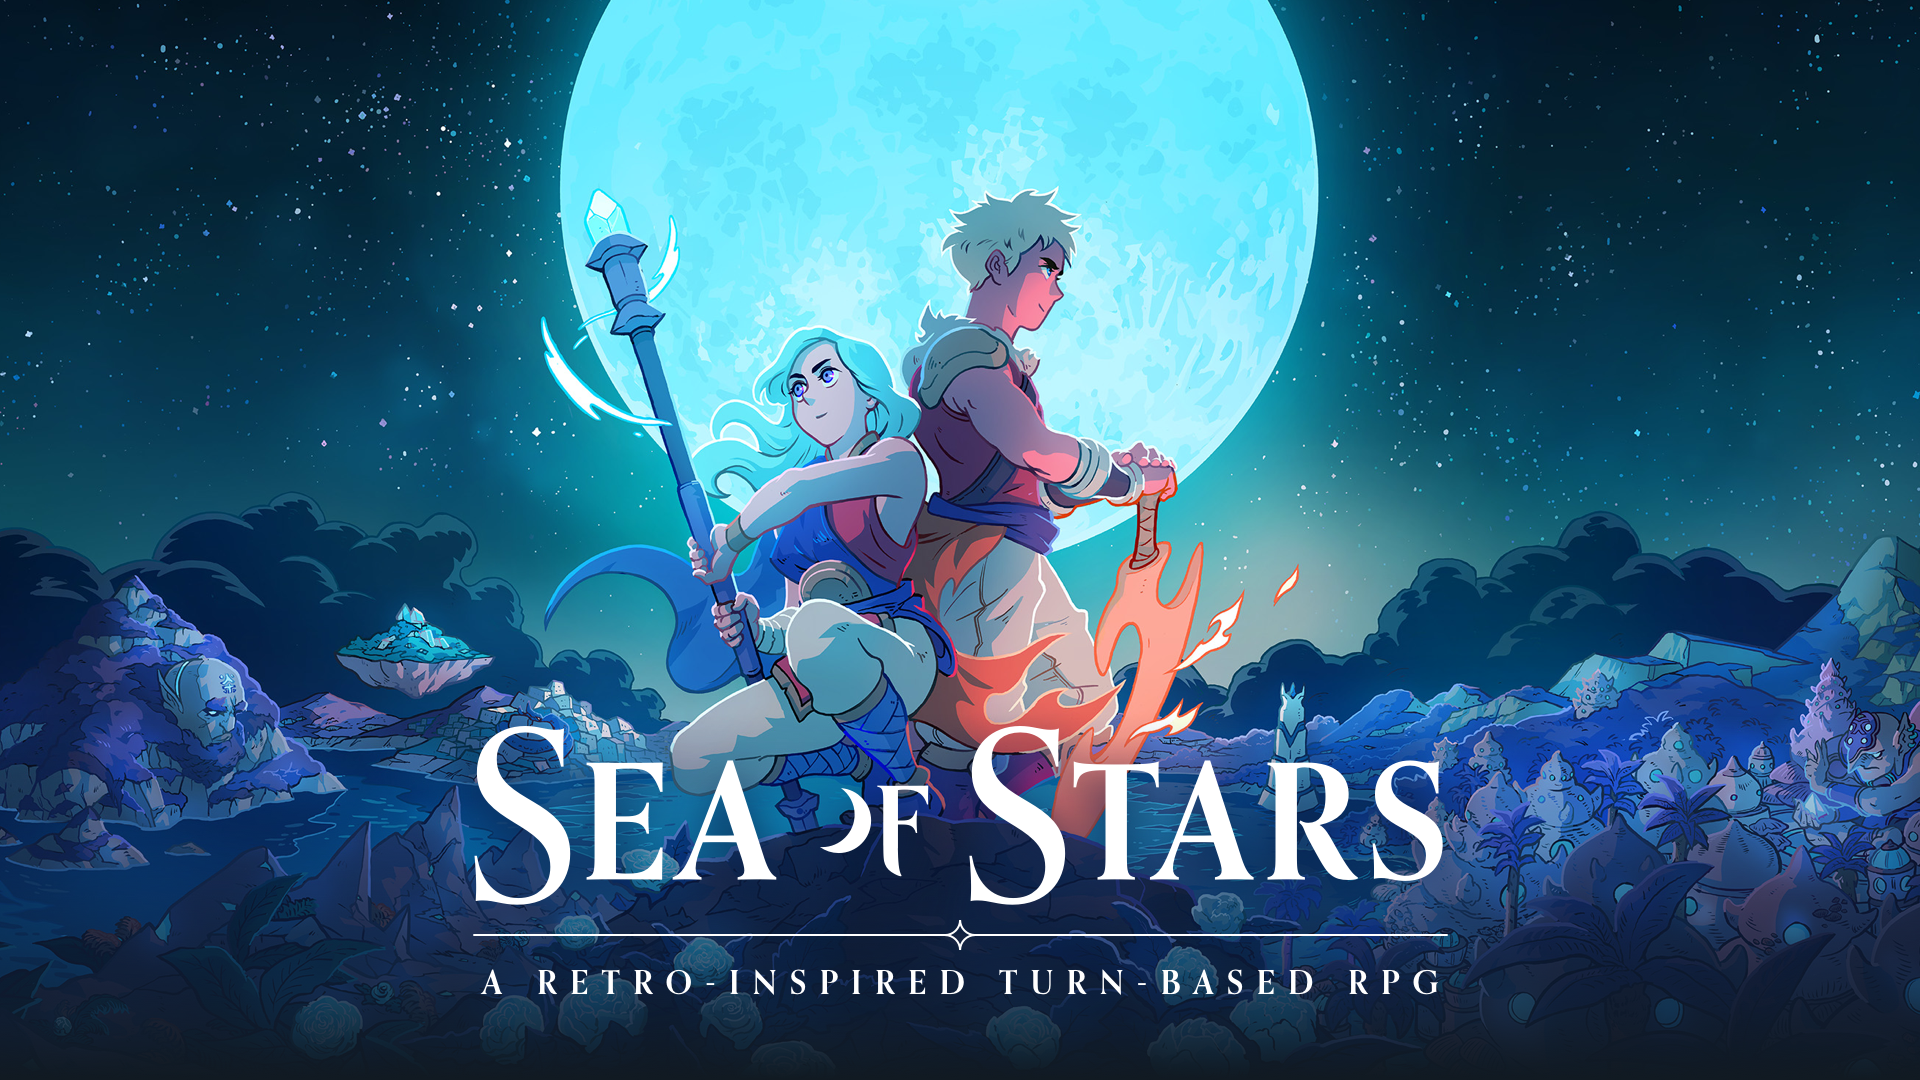 Official key art and logo for Sea of Stars